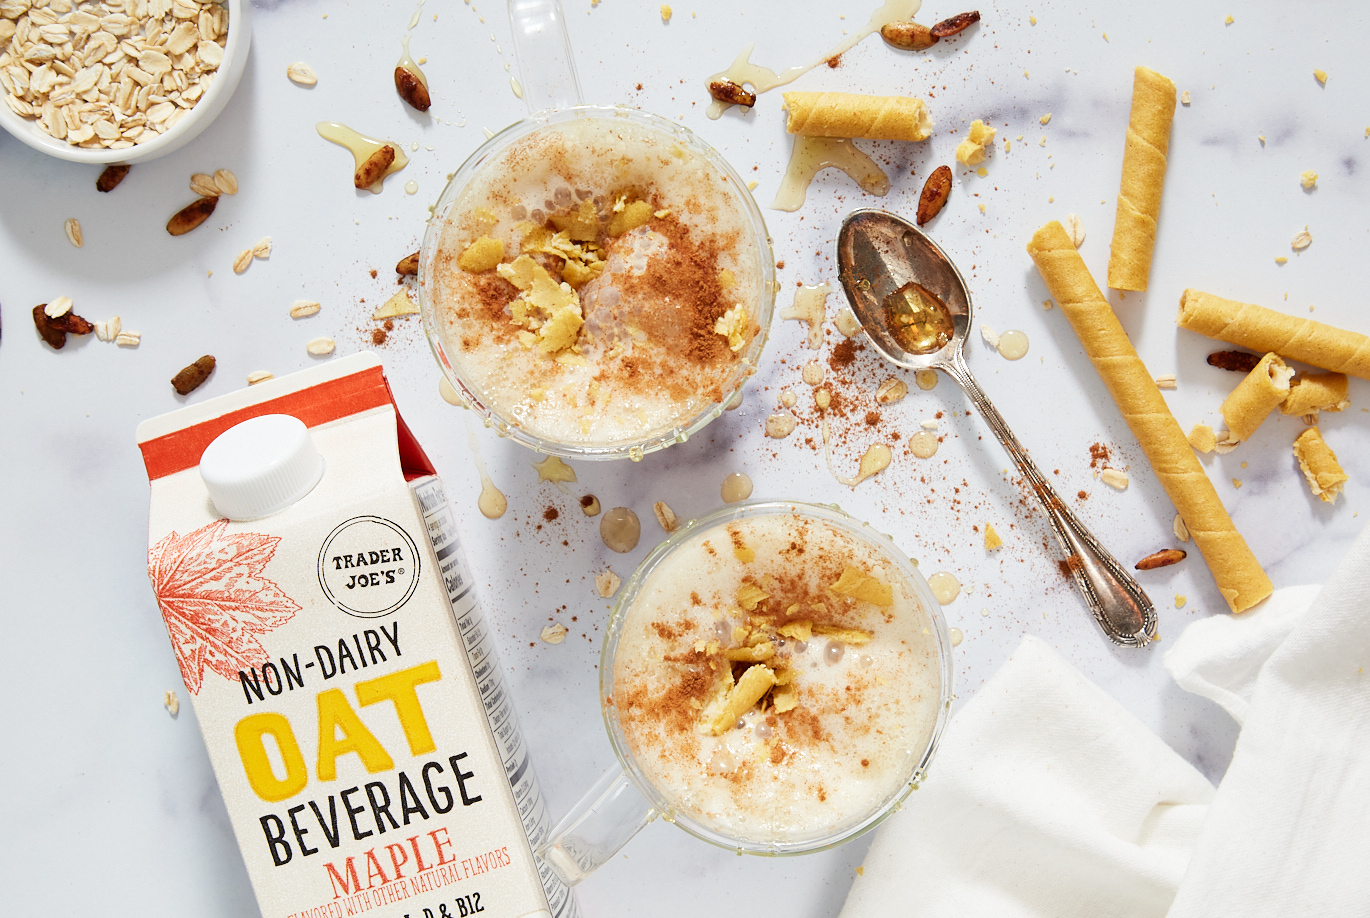 Trader Joe's Maple Non-Dairy Oat Beverage used in Maple Oat Latte recipe; in two glass mugs, with oats, cinnamon and maple surup scattered on surface